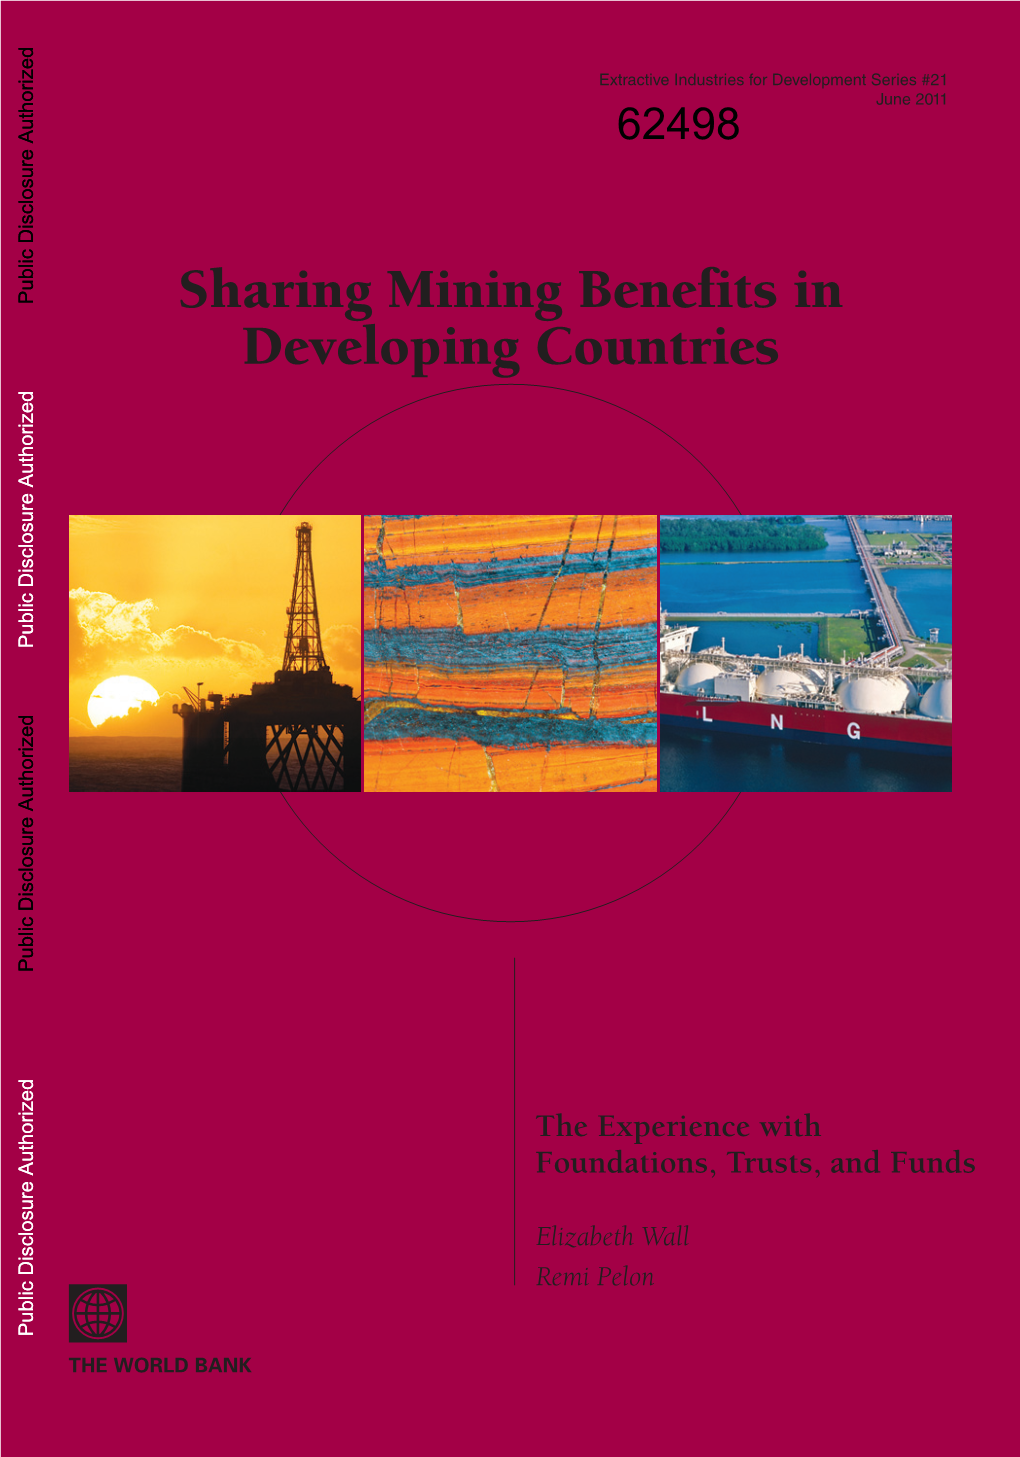 Sharing Mining Benefits in Developing Countries Public Disclosure Authorized Public Disclosure Authorized